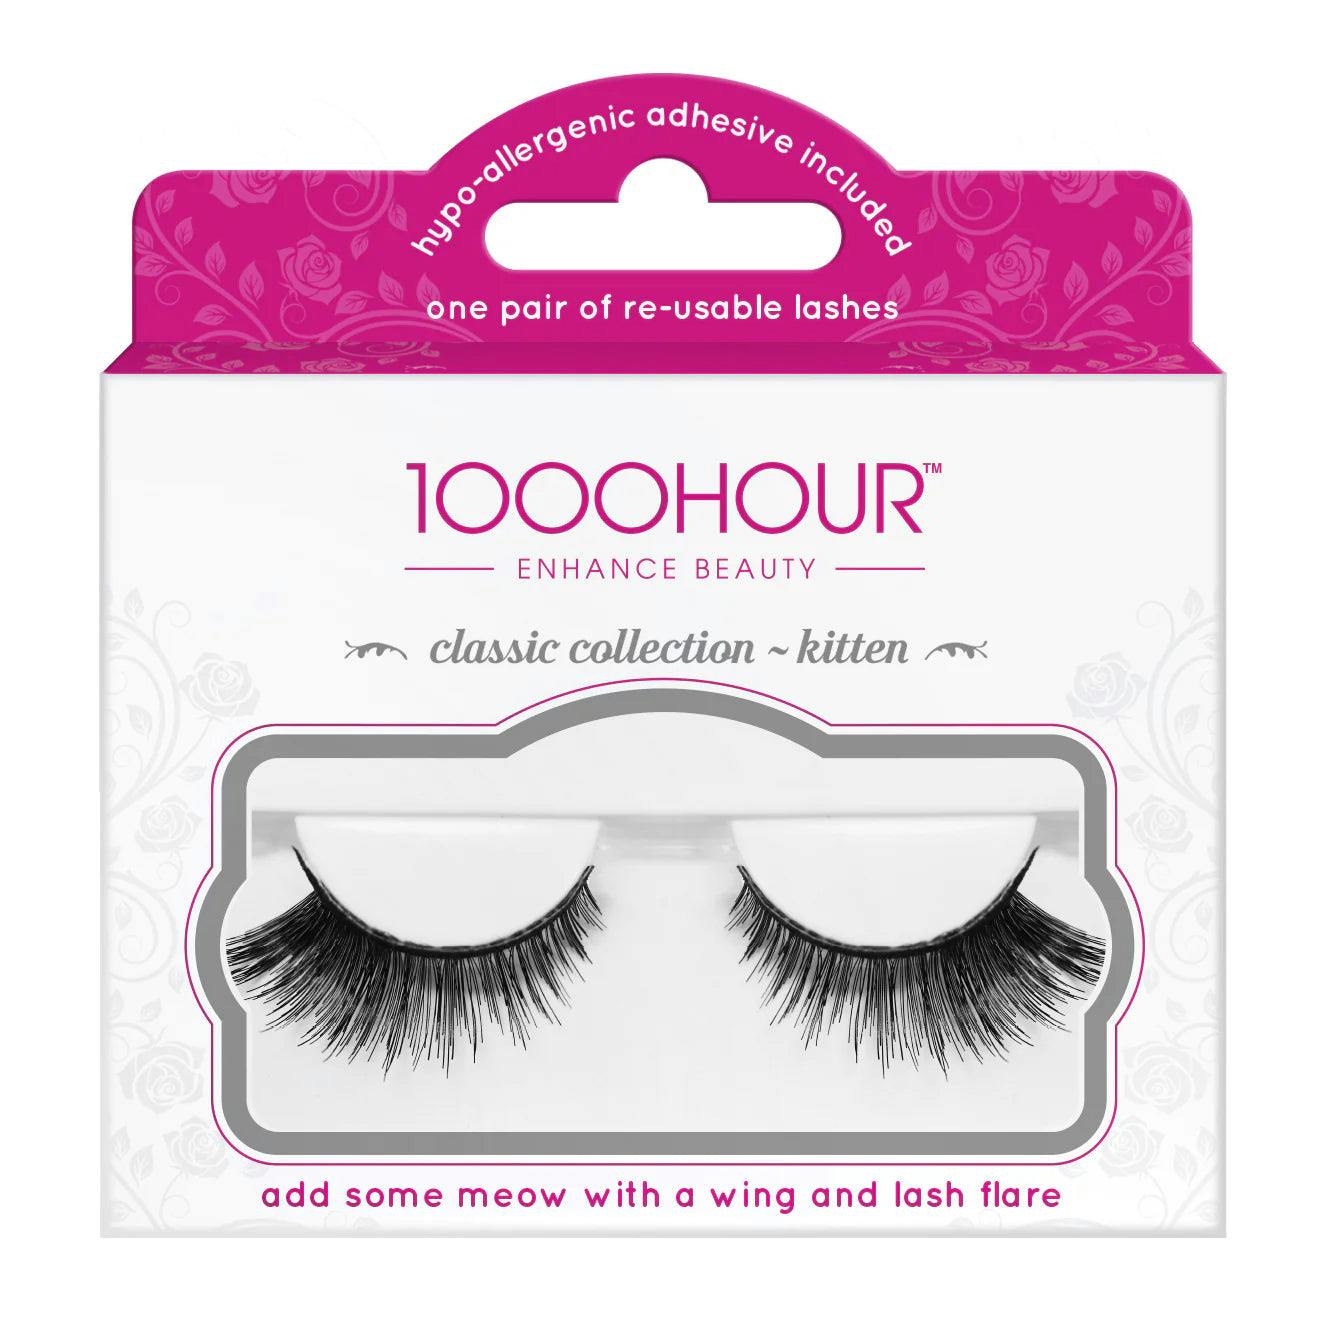 1000 Hour Classic Collection Lashes - Kitten Black #554